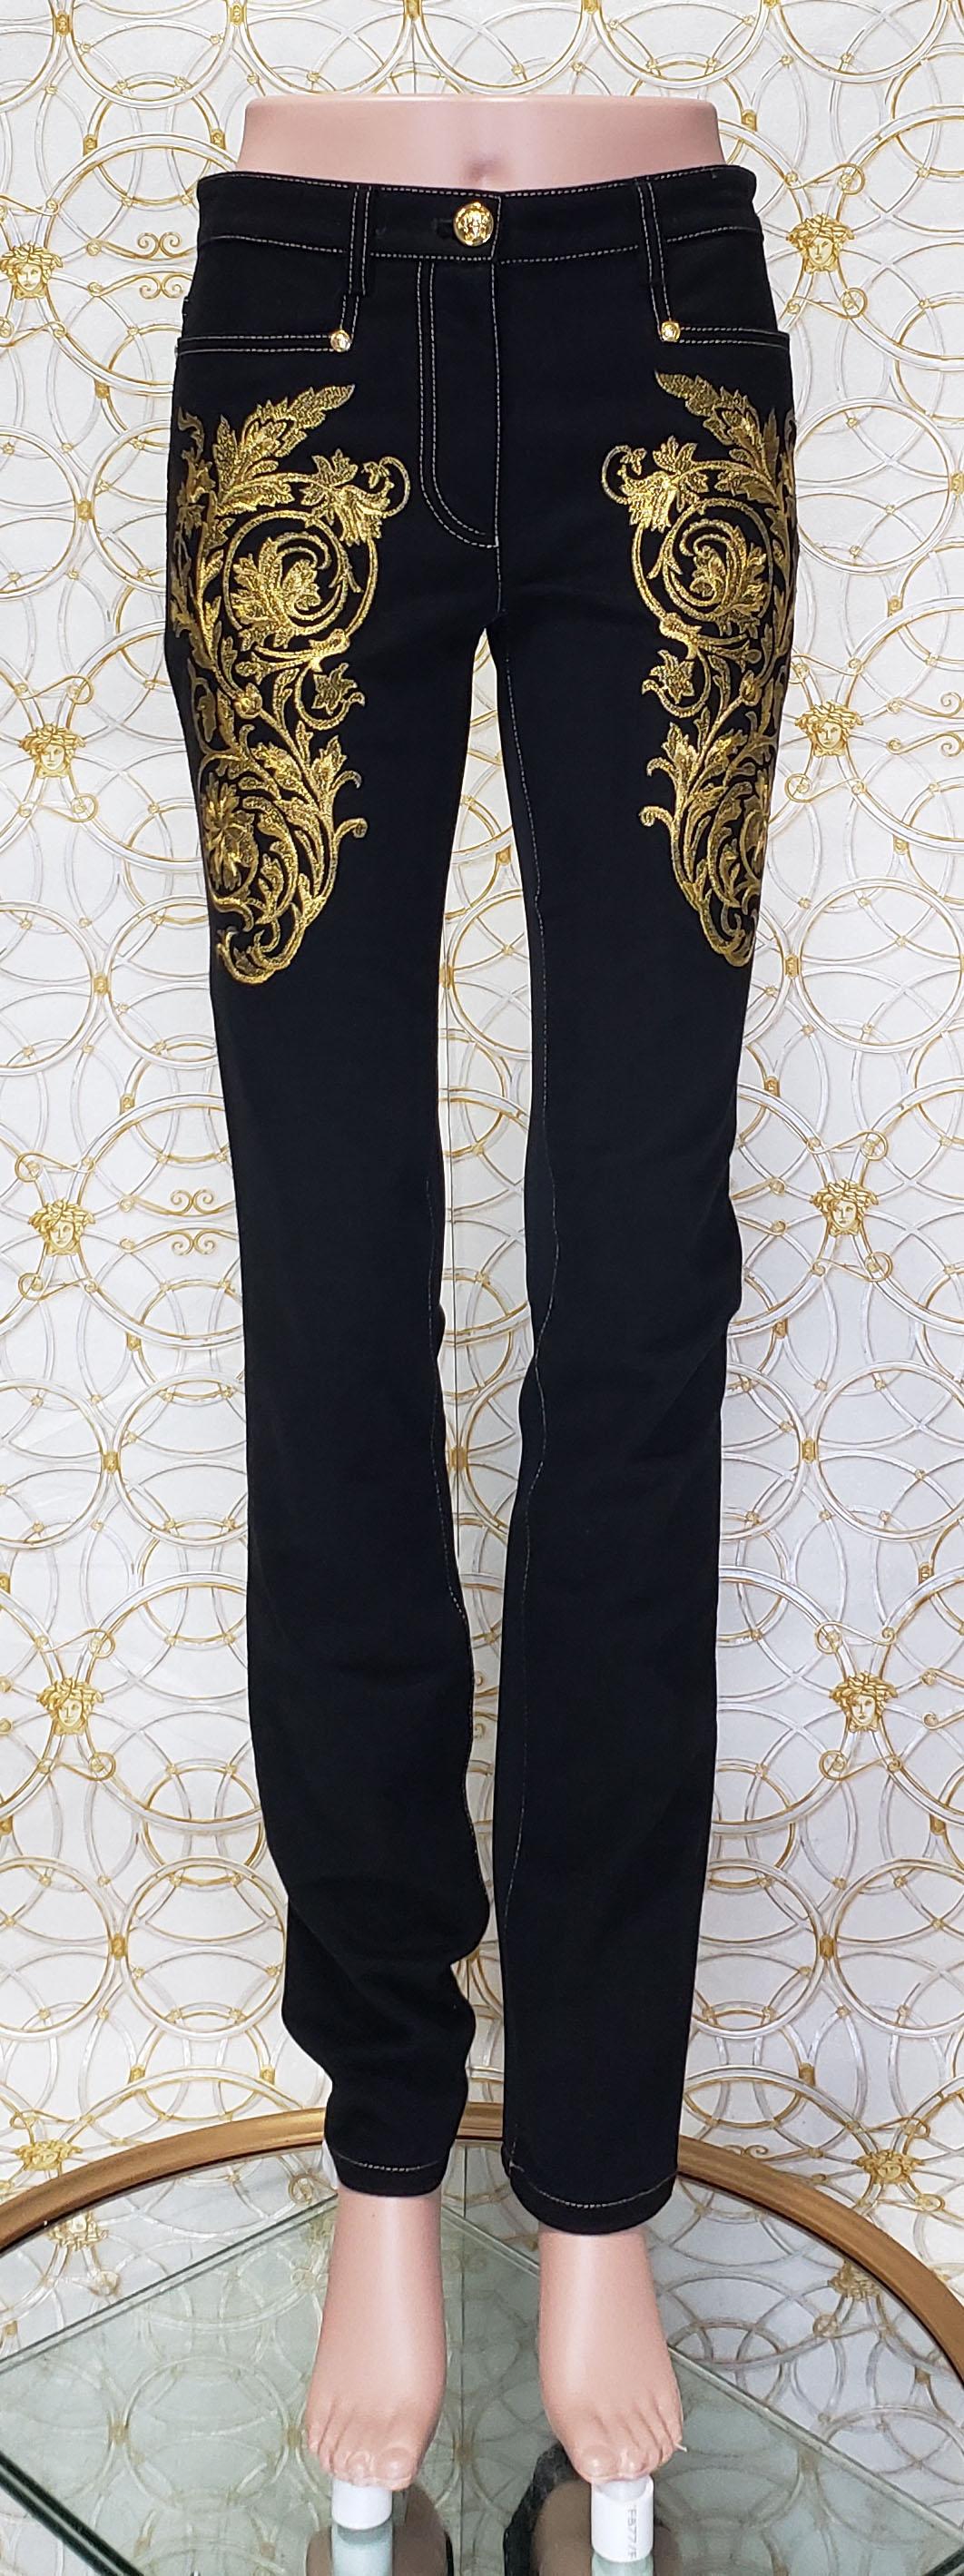 Black Pre-Fall 2013 L # 2 BRAND NEW VERSACE BAROQUE GOLD EMBROIDERED JEANS size 26 For Sale